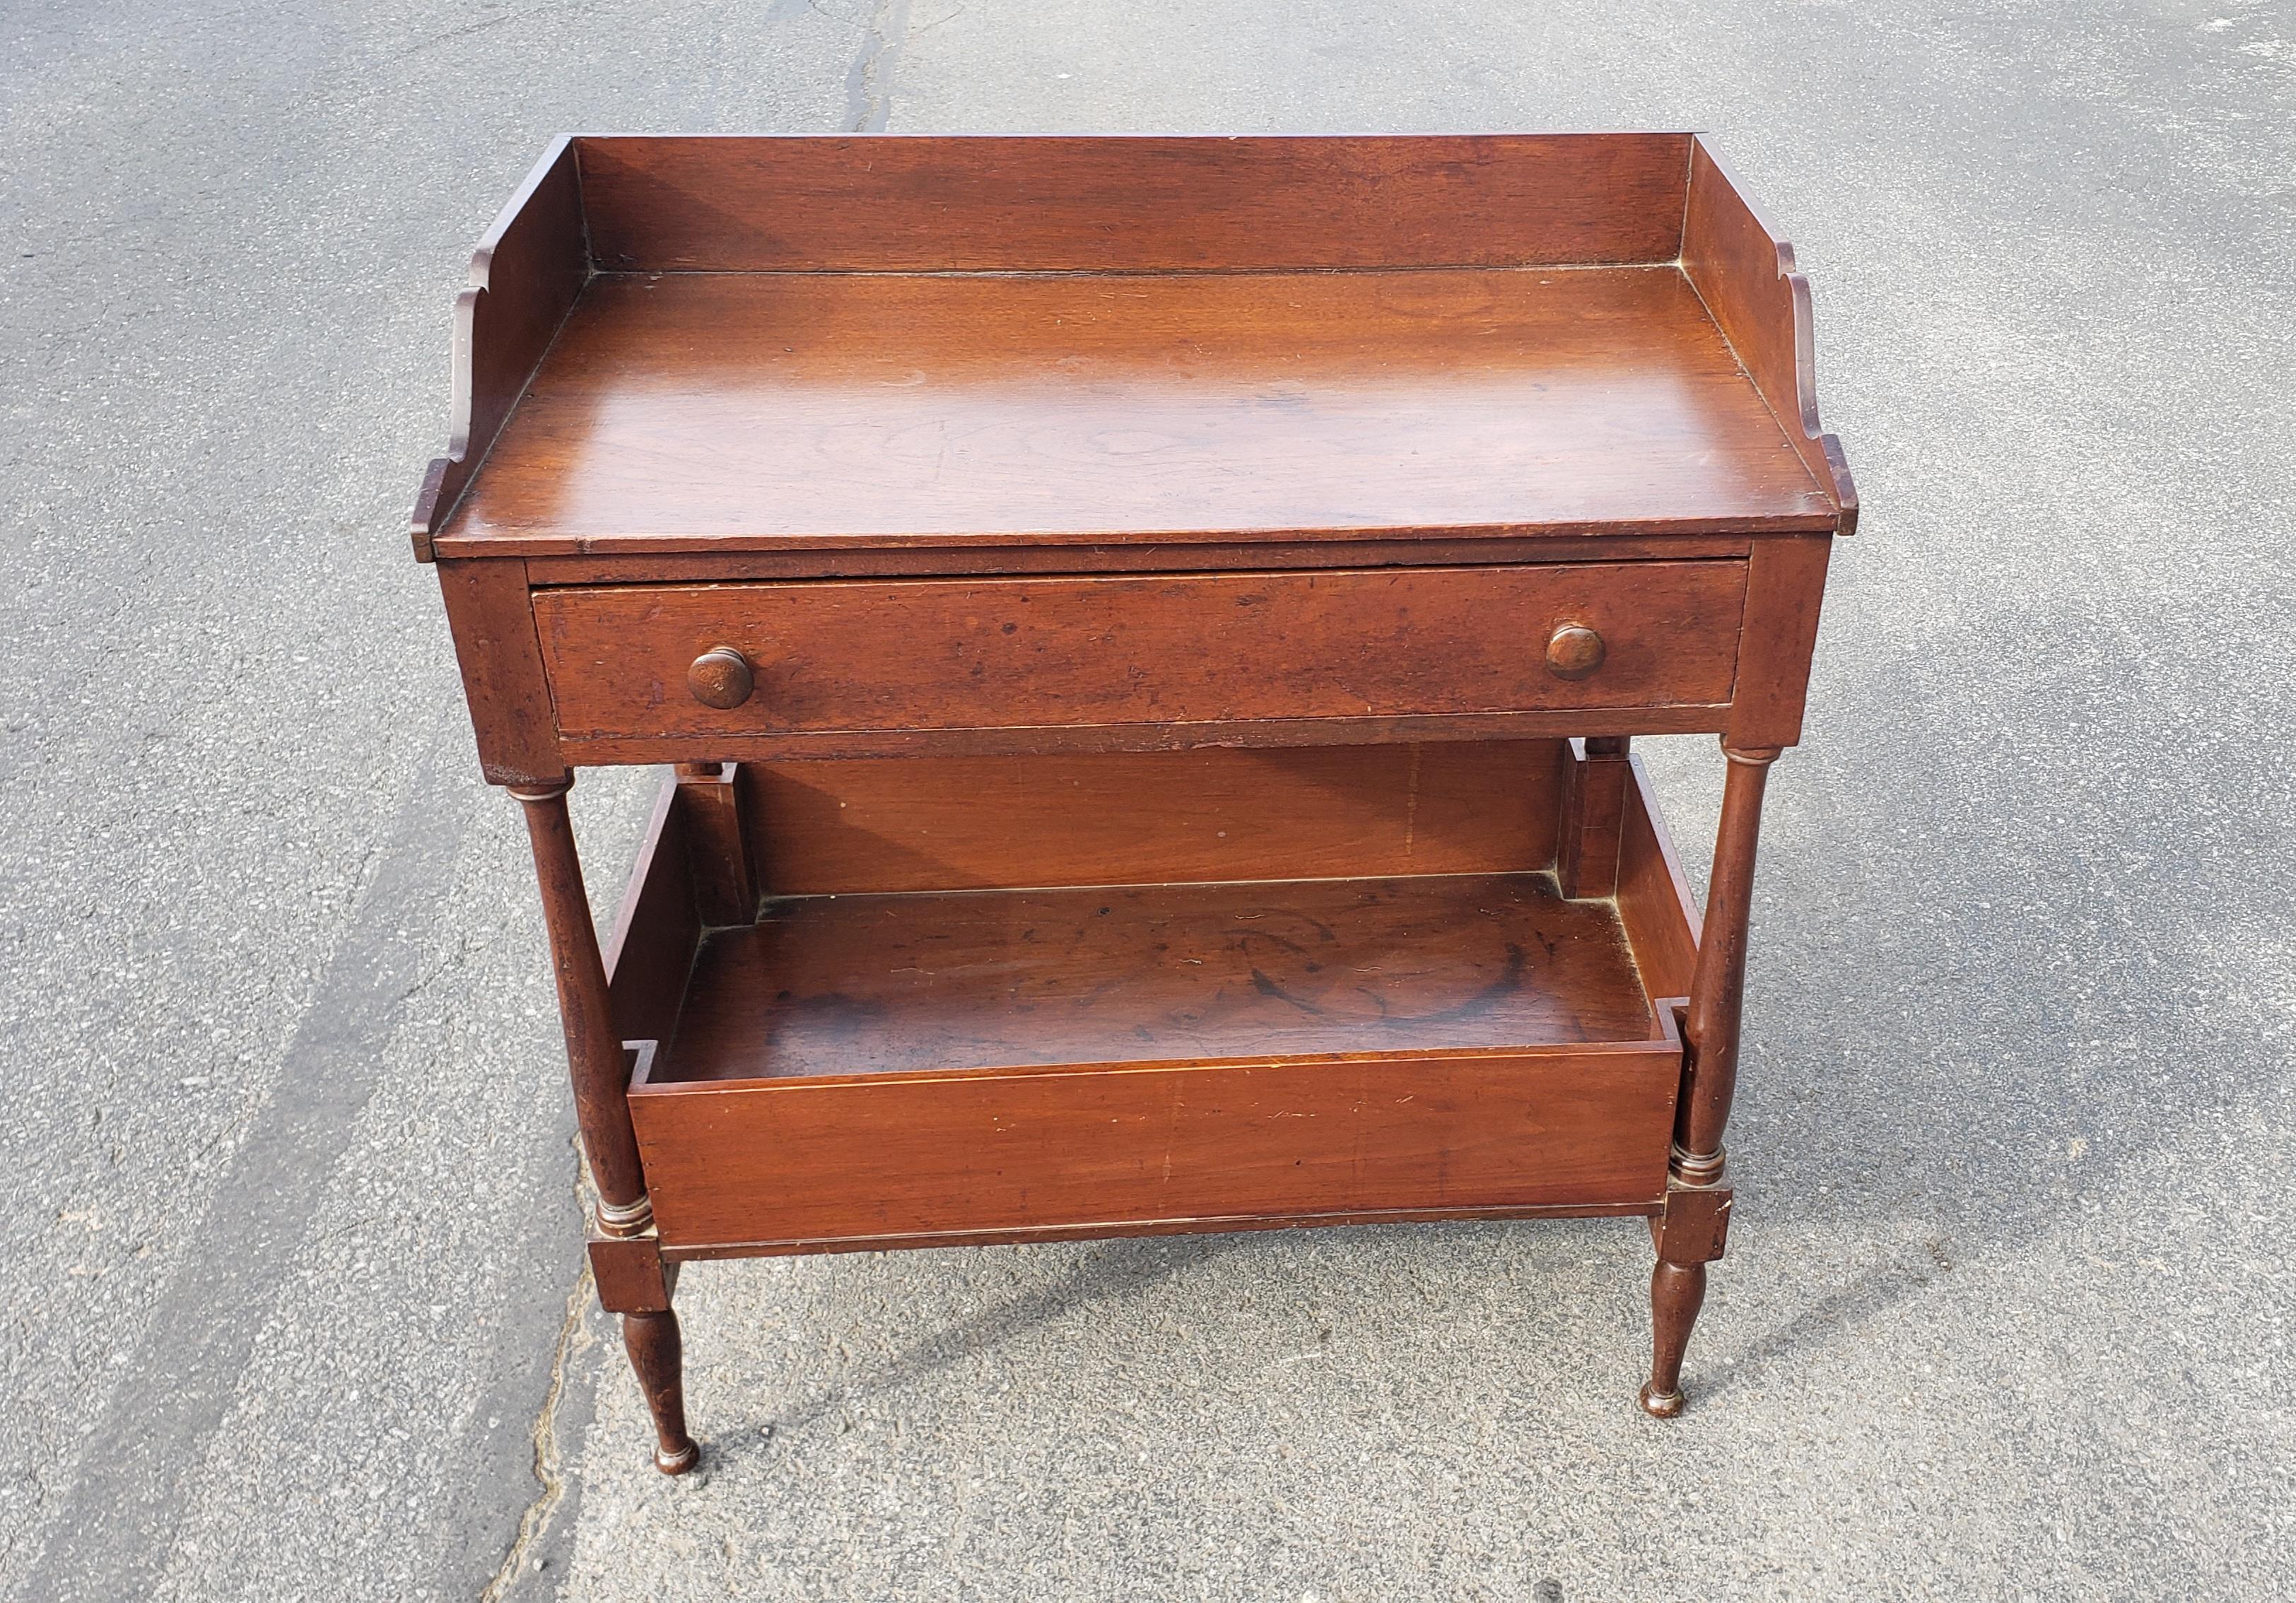 19th century walnut two tier washstand / industrial or work table with divided drawer and spacious open bottom storage.
Measures : 29.5